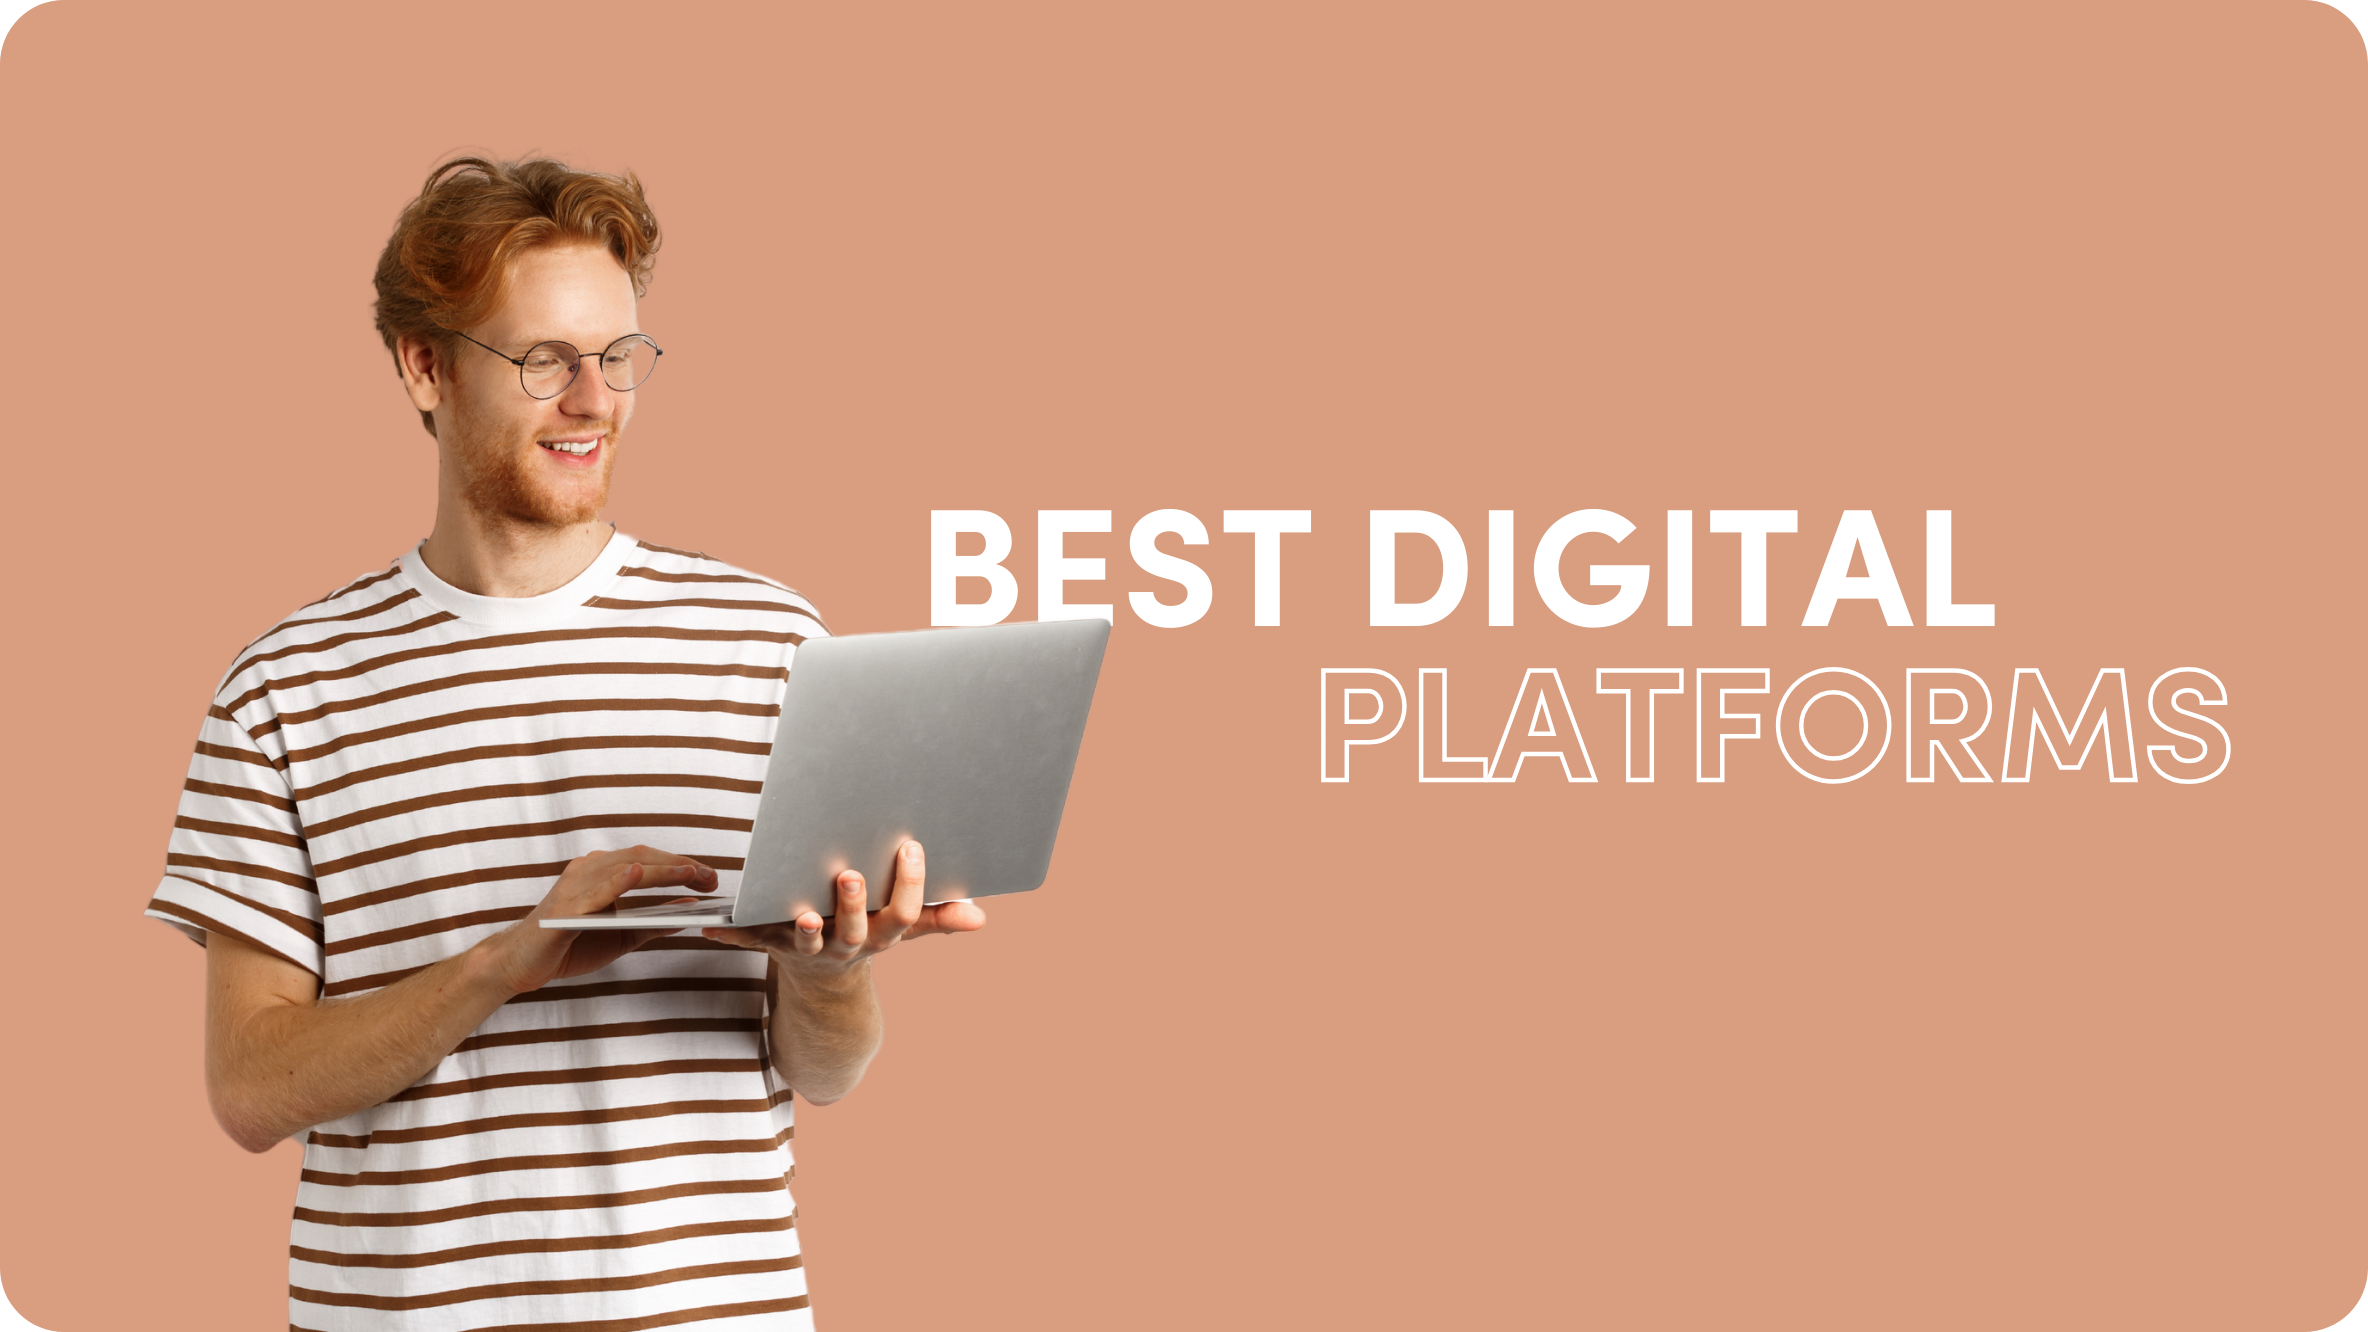 Guide to the Top Digital Marketing Sites and Online Advertising Platforms